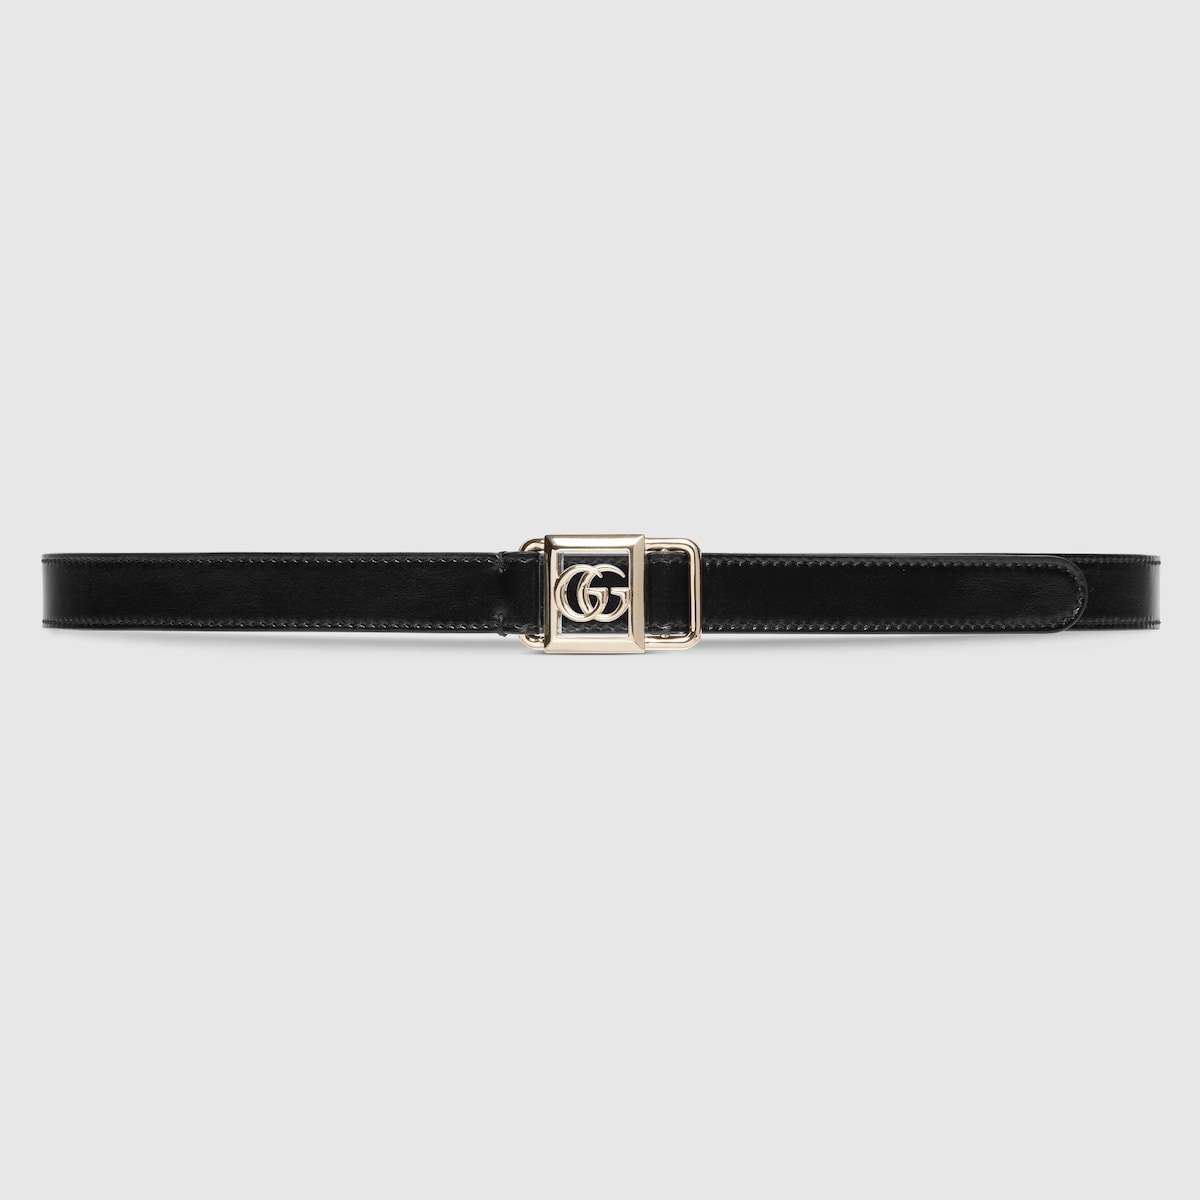 Thin belt with Double G buckle - 1